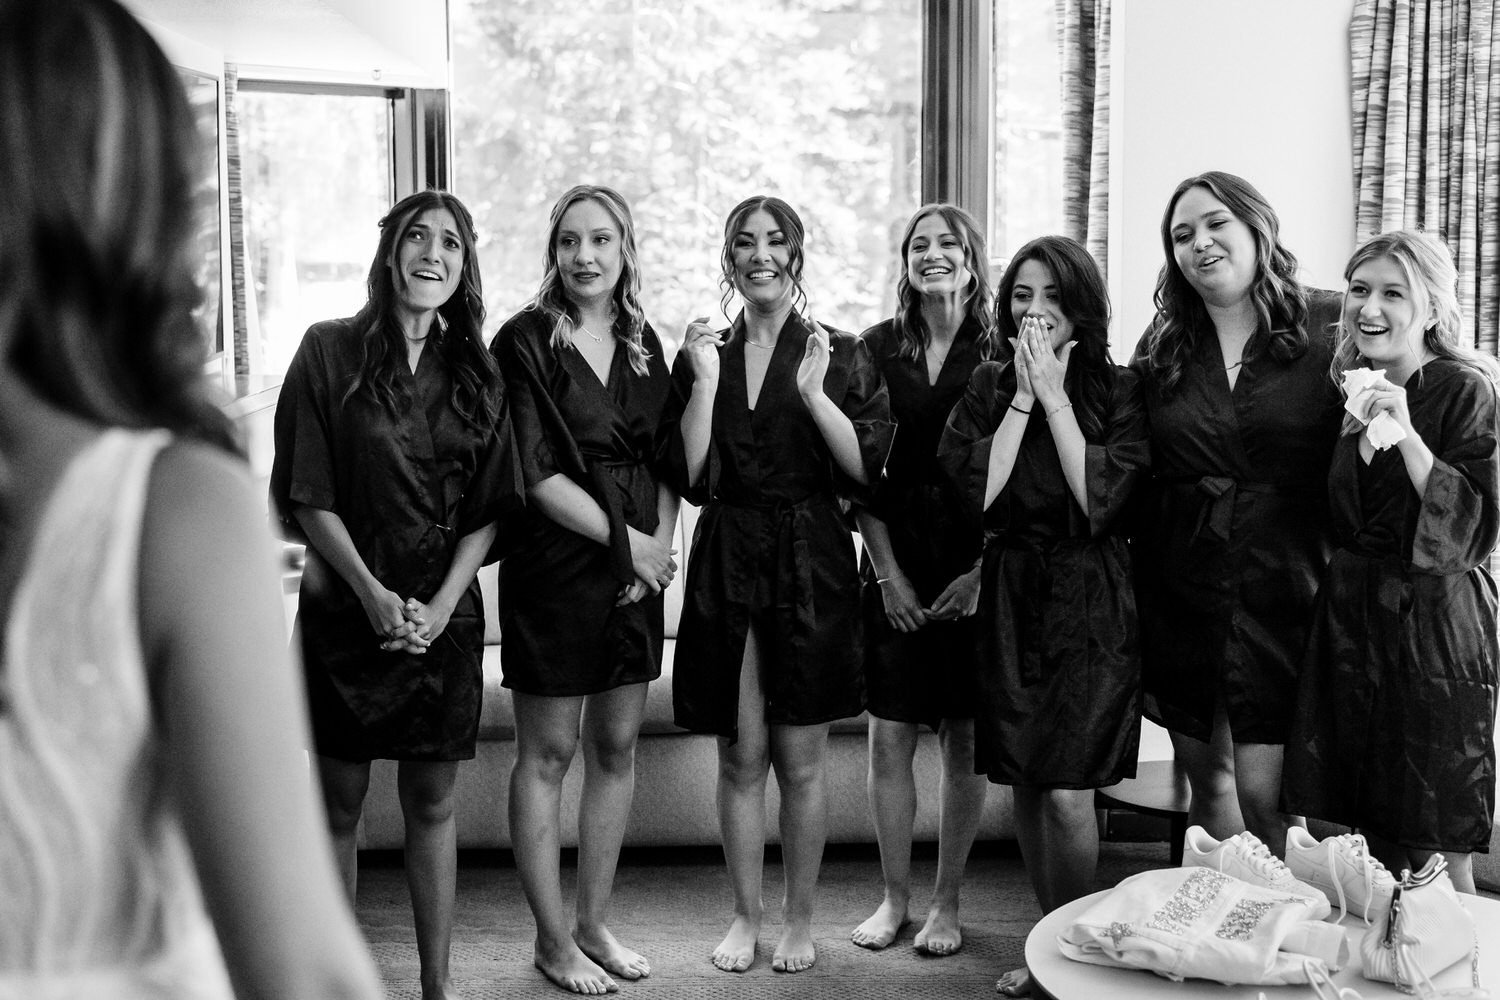 Bridesmaids in silky black robes react joyfully as the bride walks into the room wearing her wedding dress.